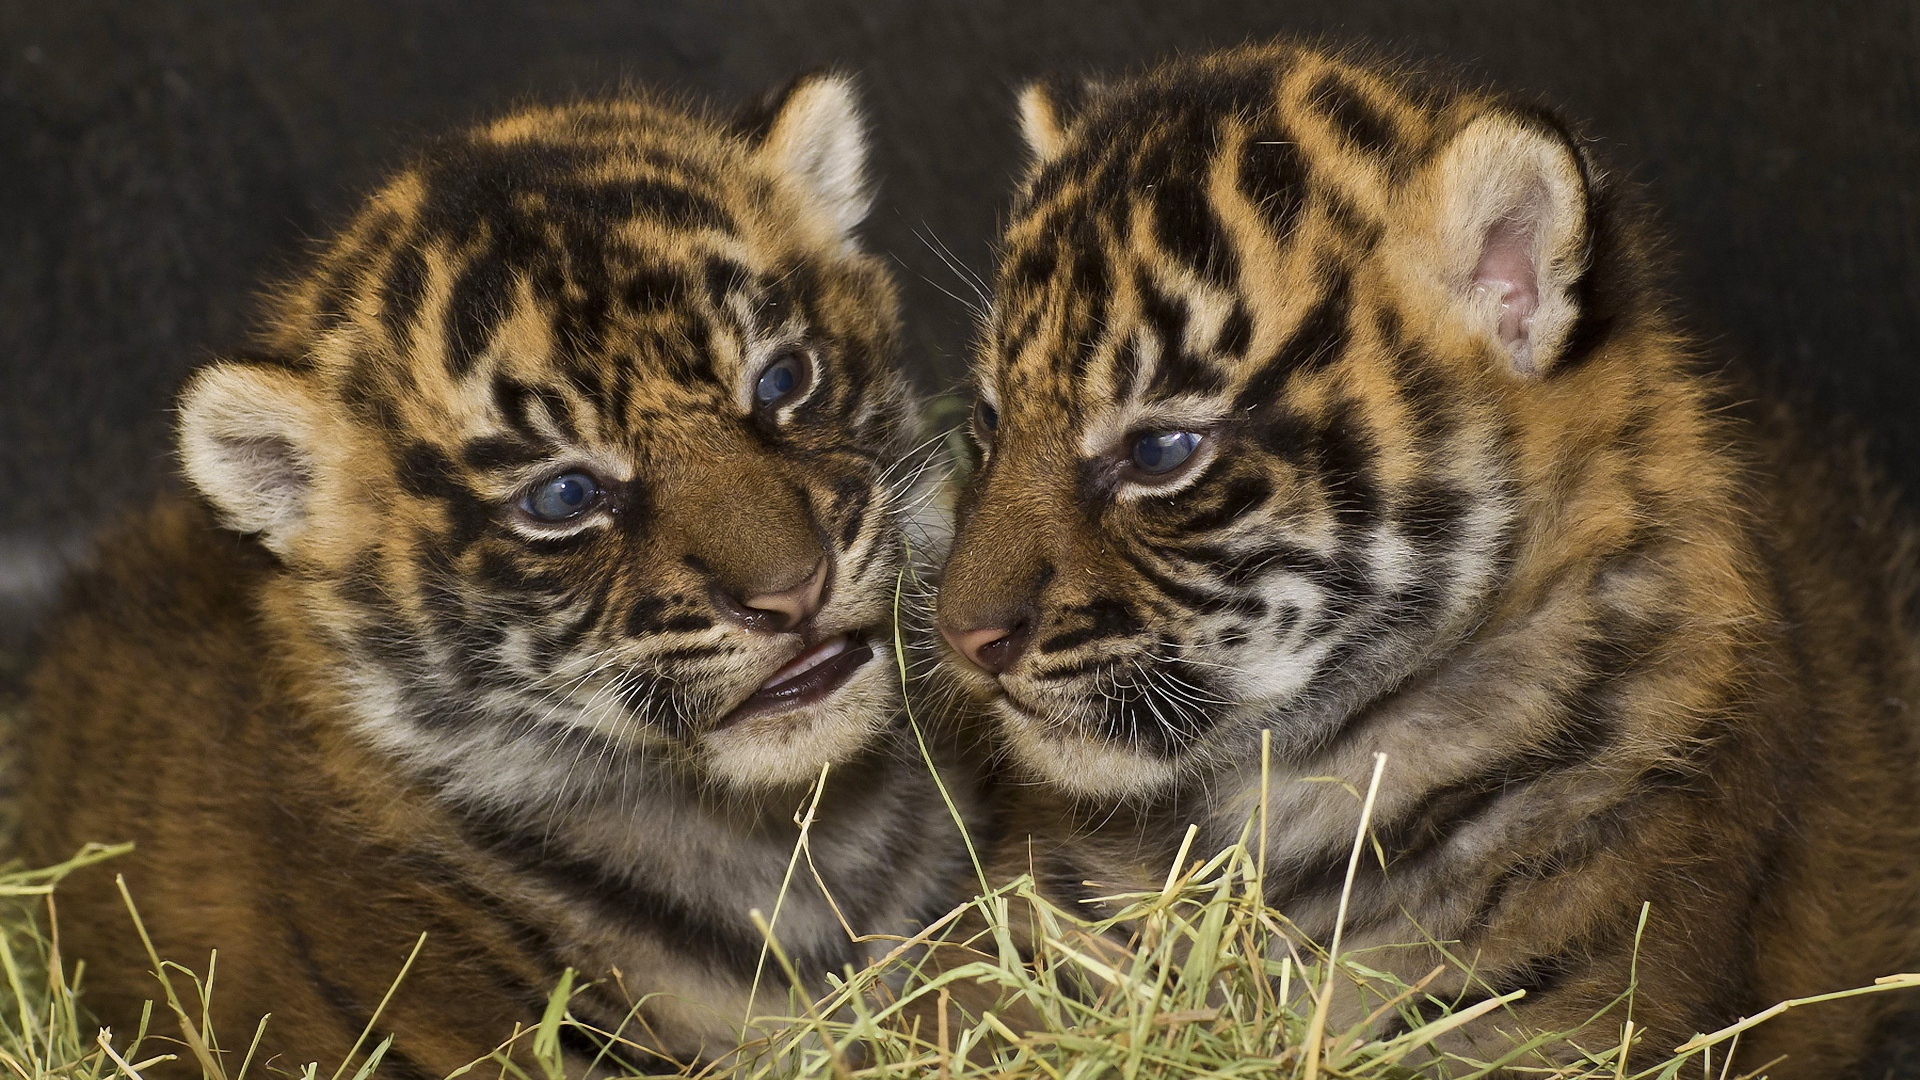  Tigers Cubs Couple Down Big cats Wallpaper Background Full HD 1920x1080